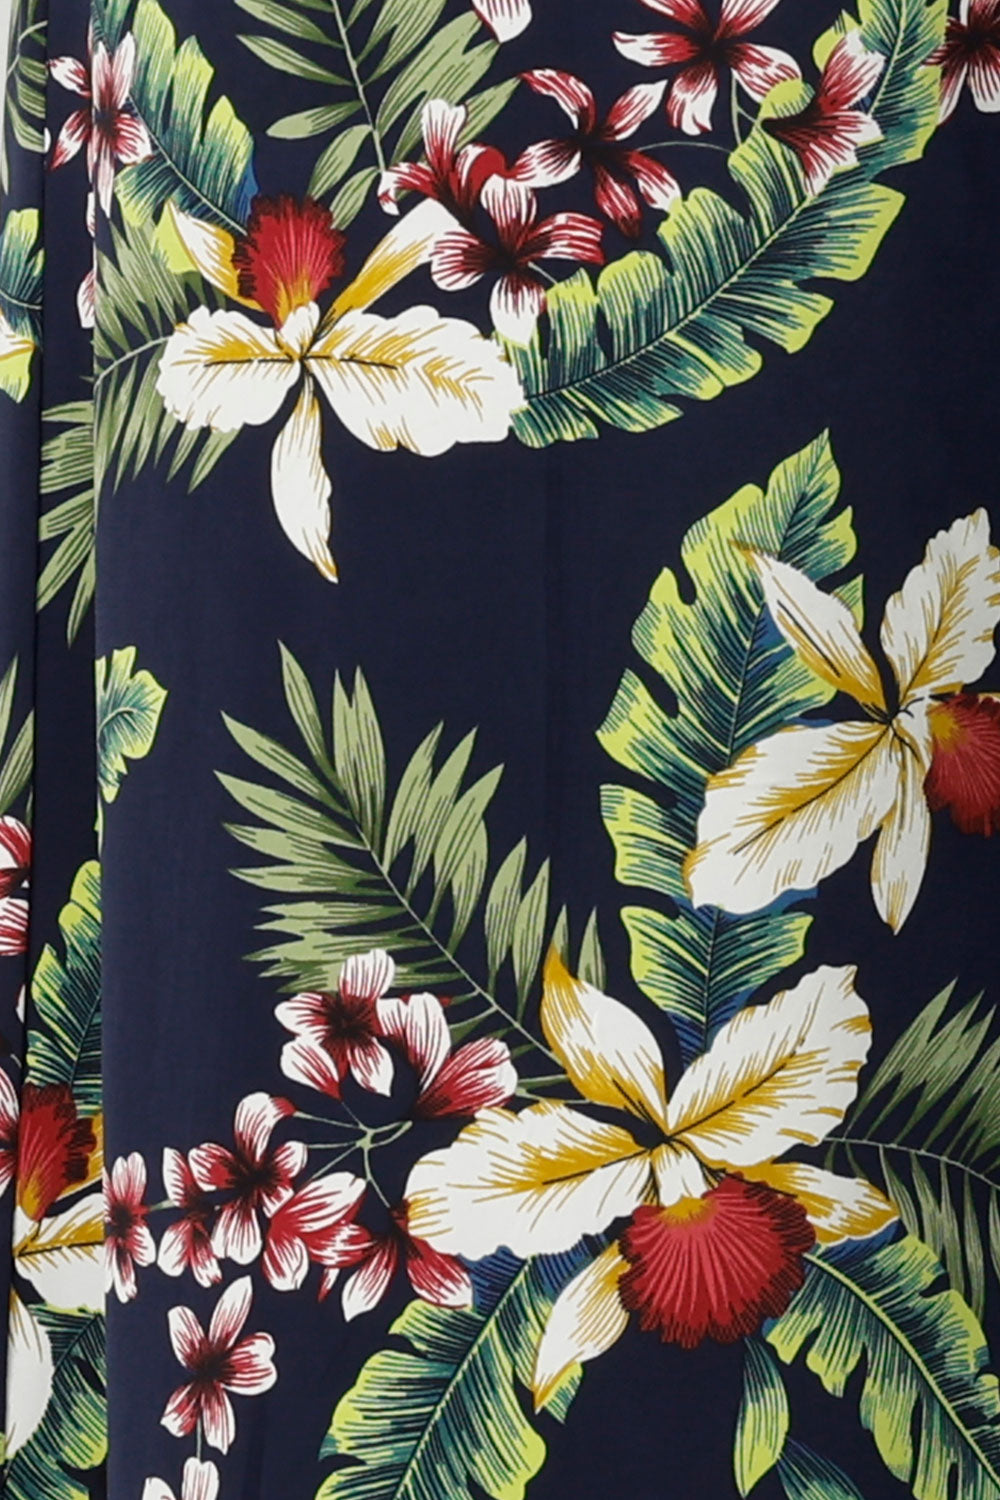 Soft jersey in Merriment Tropical Christmas print  for Australian made fashion label Leina & Fleur size 8 -24. 